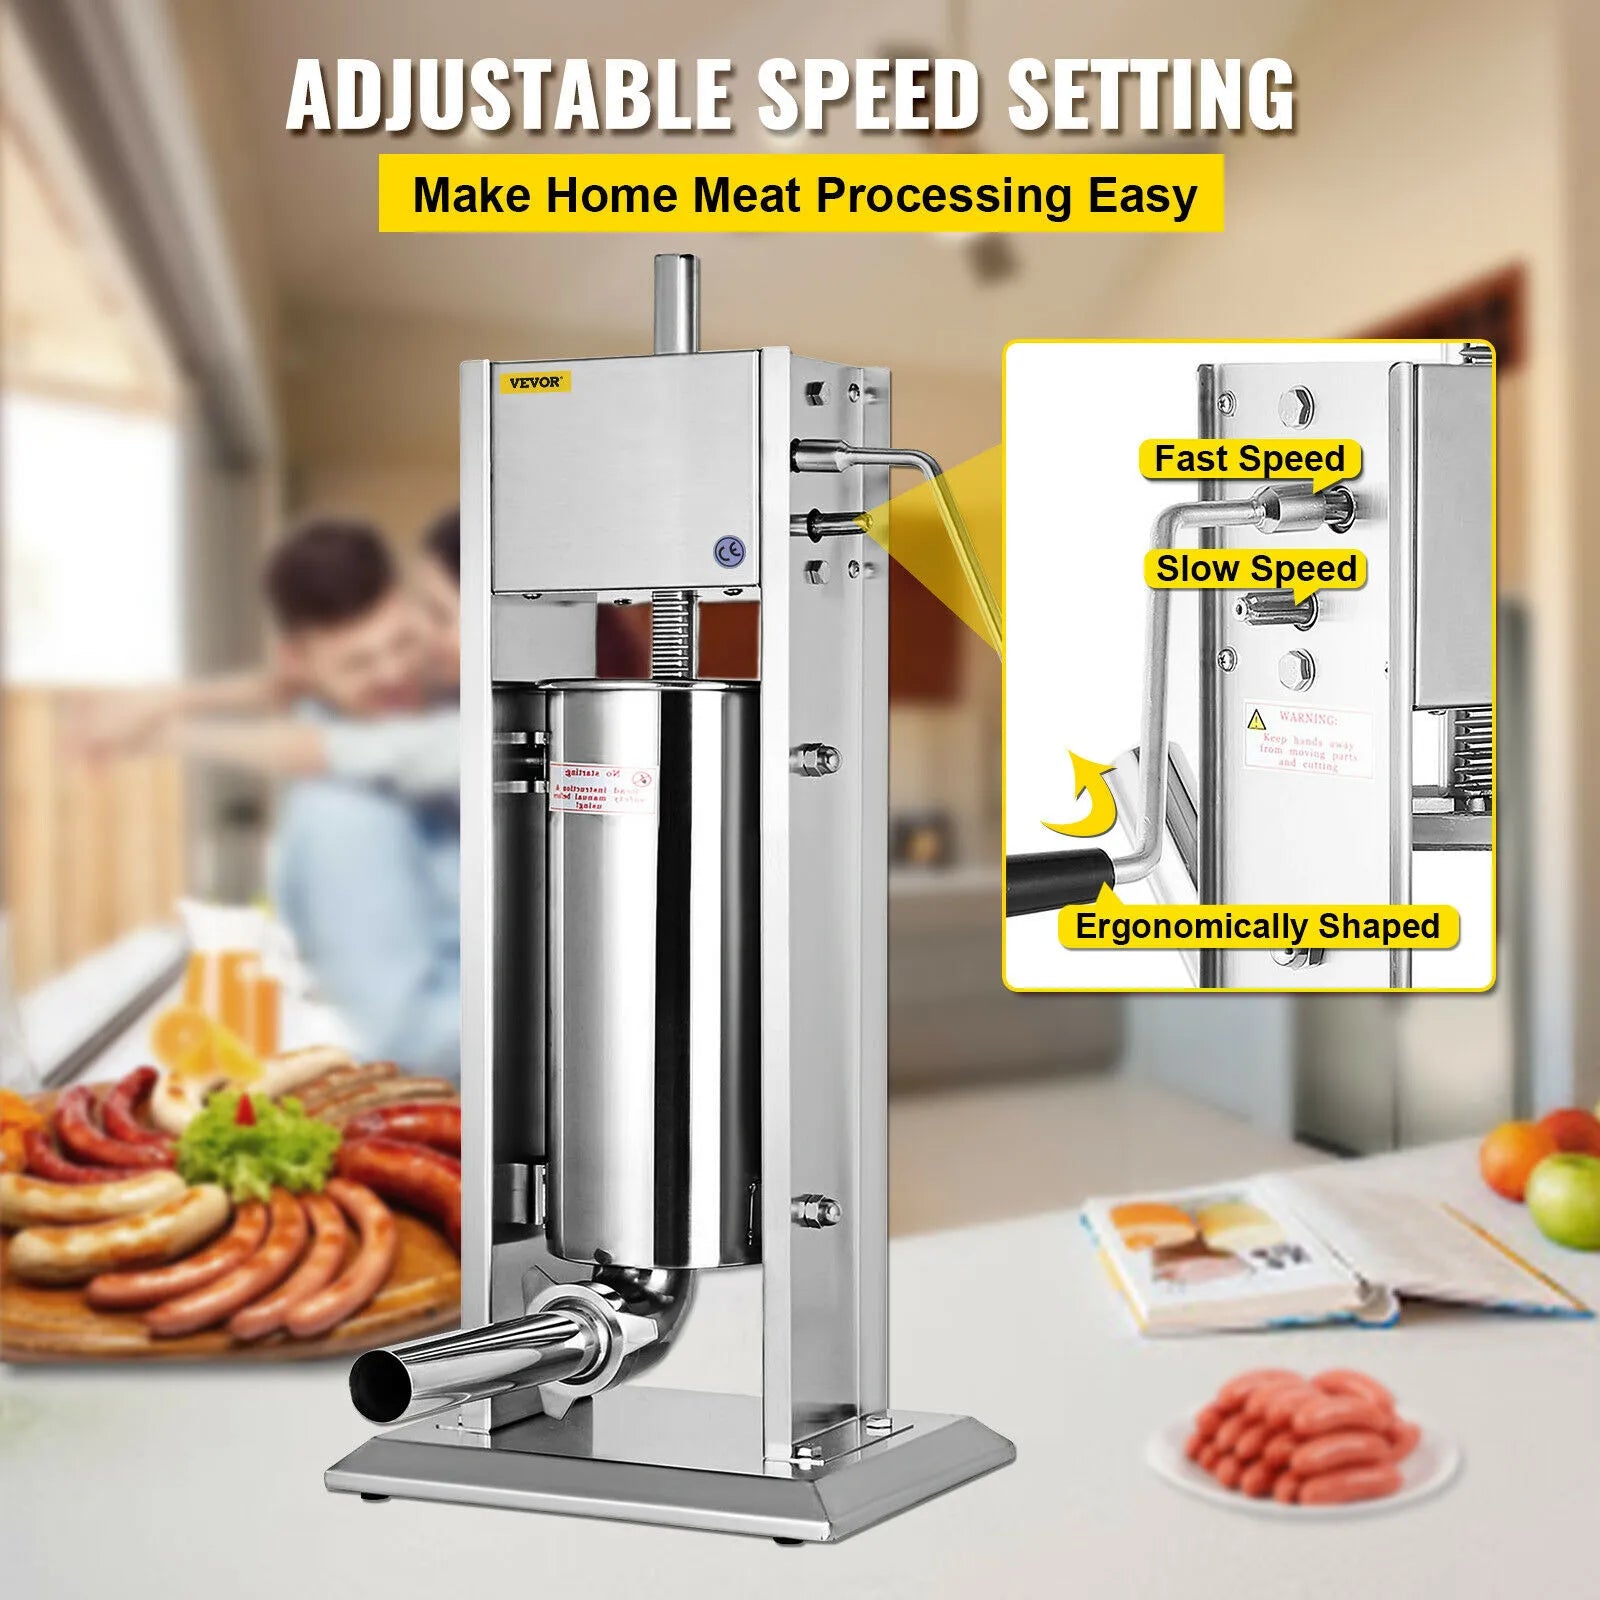 VEVOR 3L 5L 7L 10L 15L Vertical Sausage Stuffer Food Processors 5 Filling Nozzles Kitchen Accessories Home Appliance for Hot Dog - Premium  from Yard Agri Supply - Just $293.95! Shop now at Yard Agri Supply